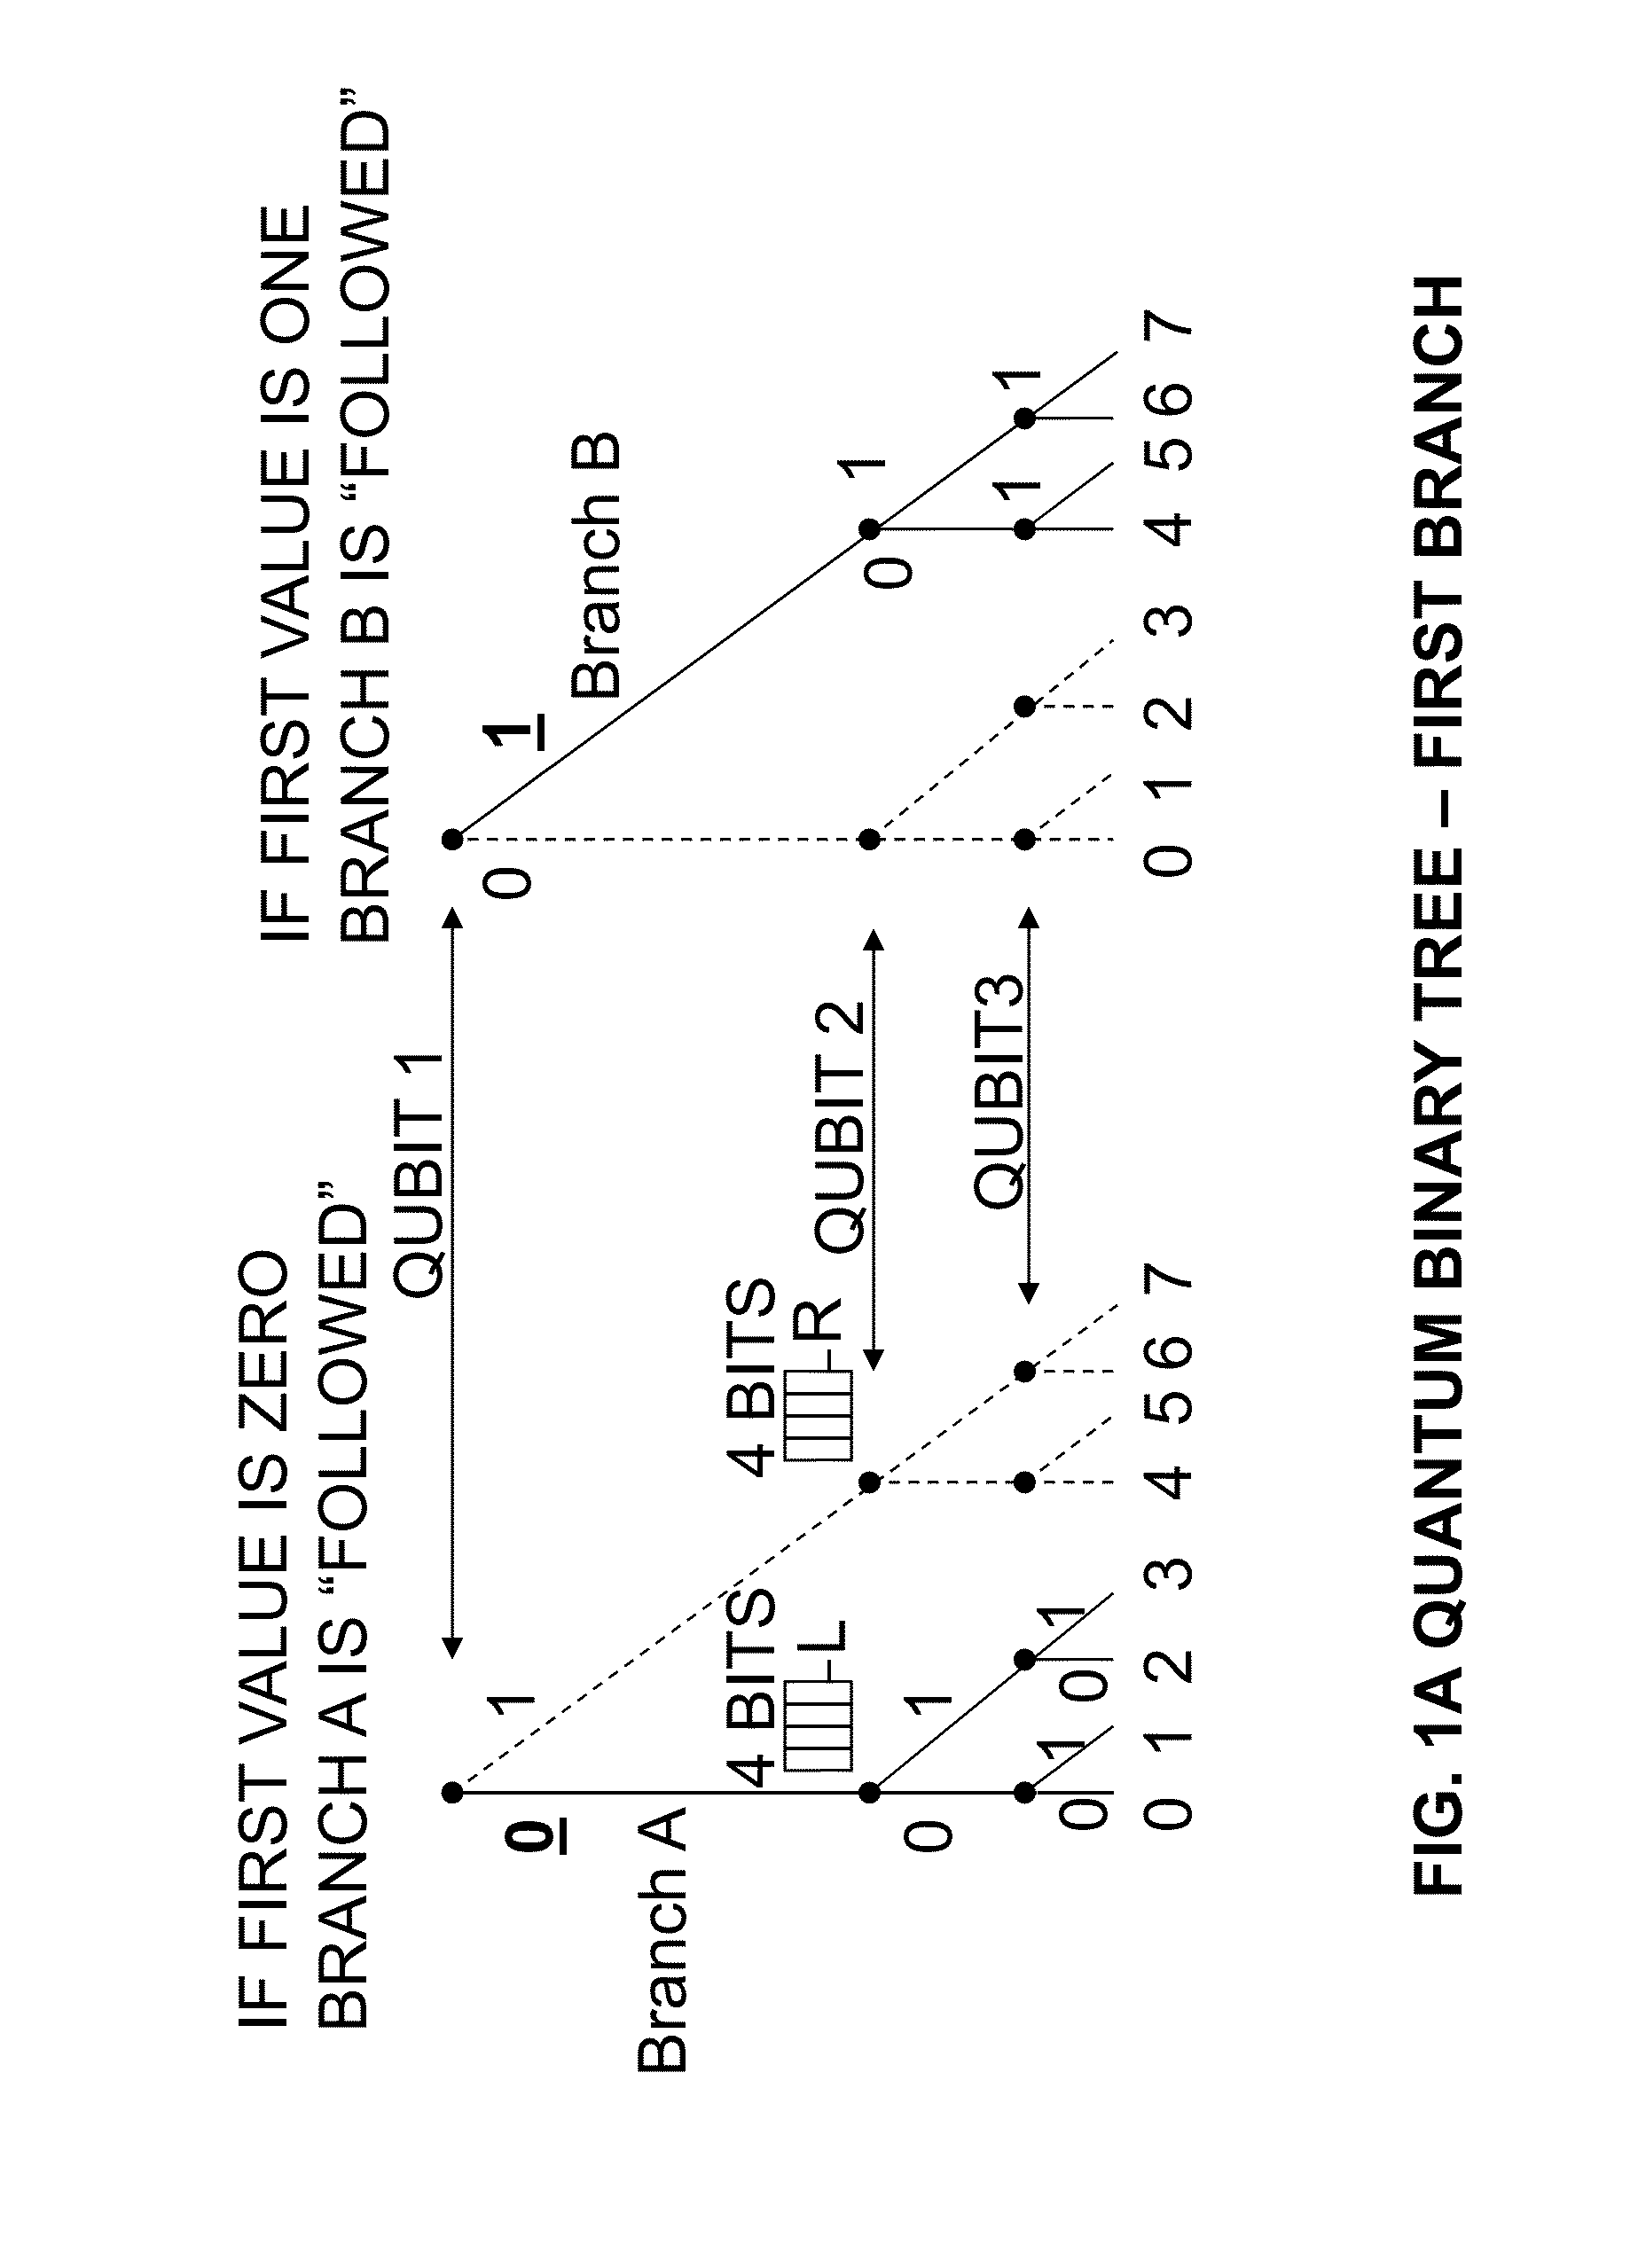 Quantum based information transfer system and method